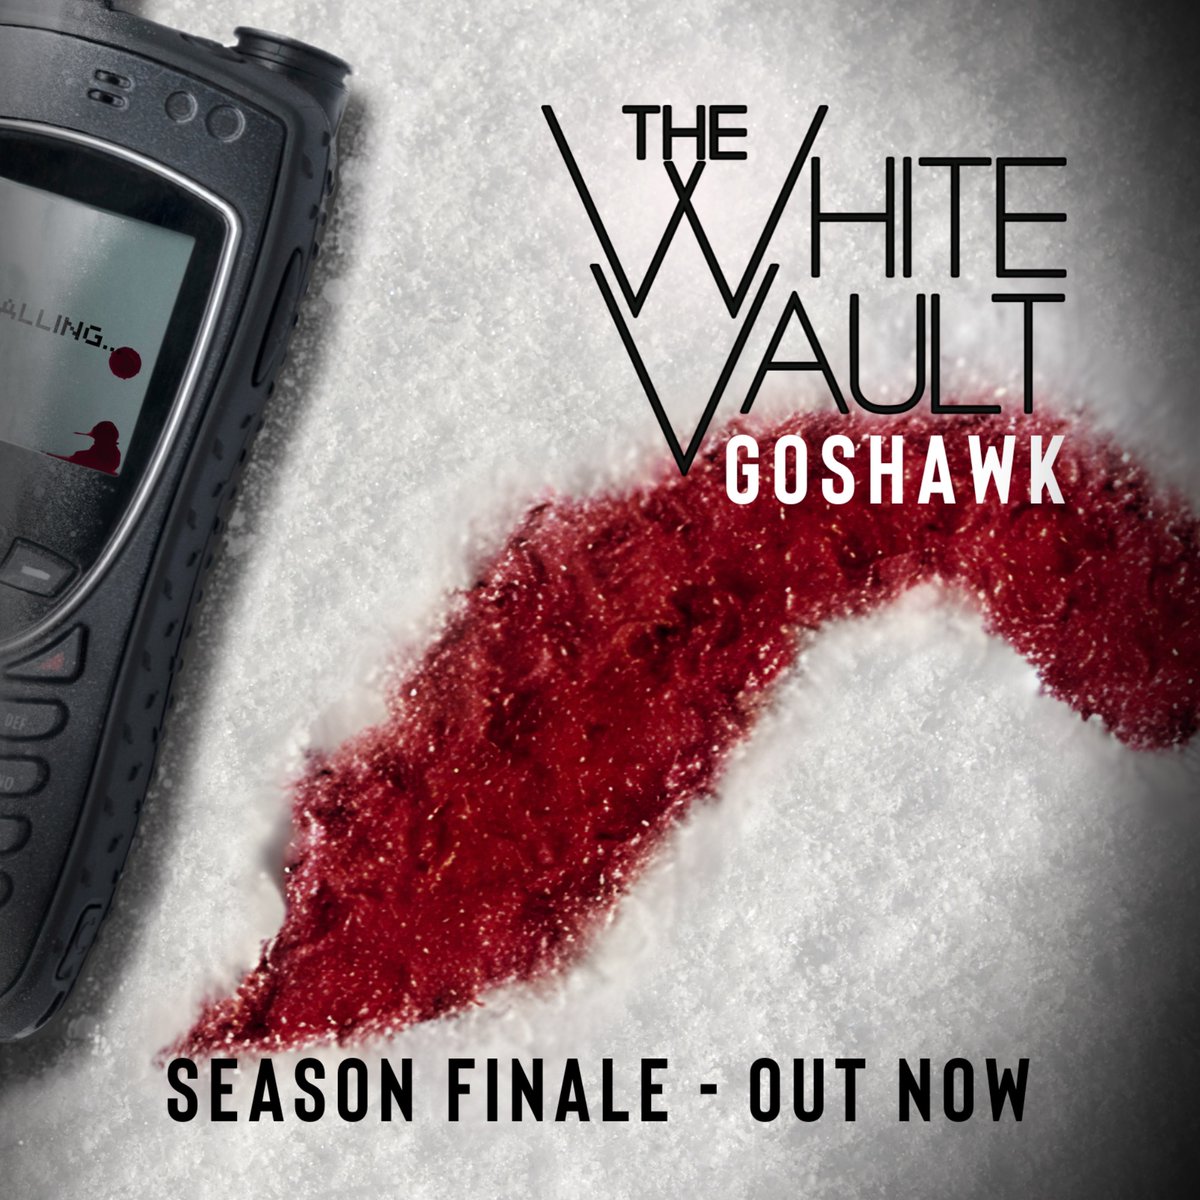 -Pick up. Please, pick up.- The White Vault: Goshawk season finale is out now! Join us for the final episode this season as our story prepares for the long haul. Thank you for listening and we will return once the chill winds blow yet again...